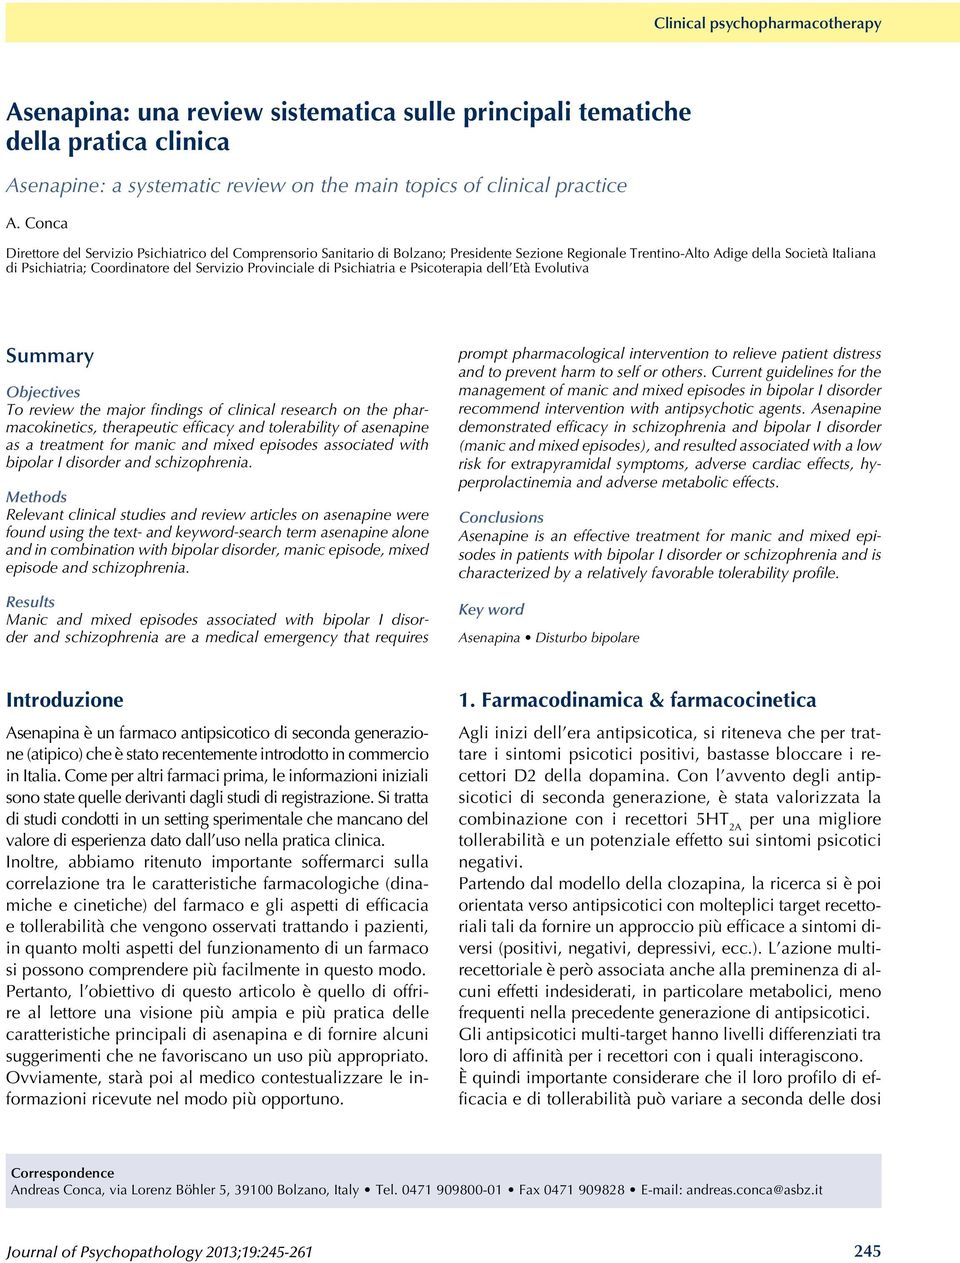 Provinciale di Psichiatria e Psicoterapia dell Età Evolutiva Summary Objectives To review the major findings of clinical research on the pharmacokinetics, therapeutic efficacy and tolerability of